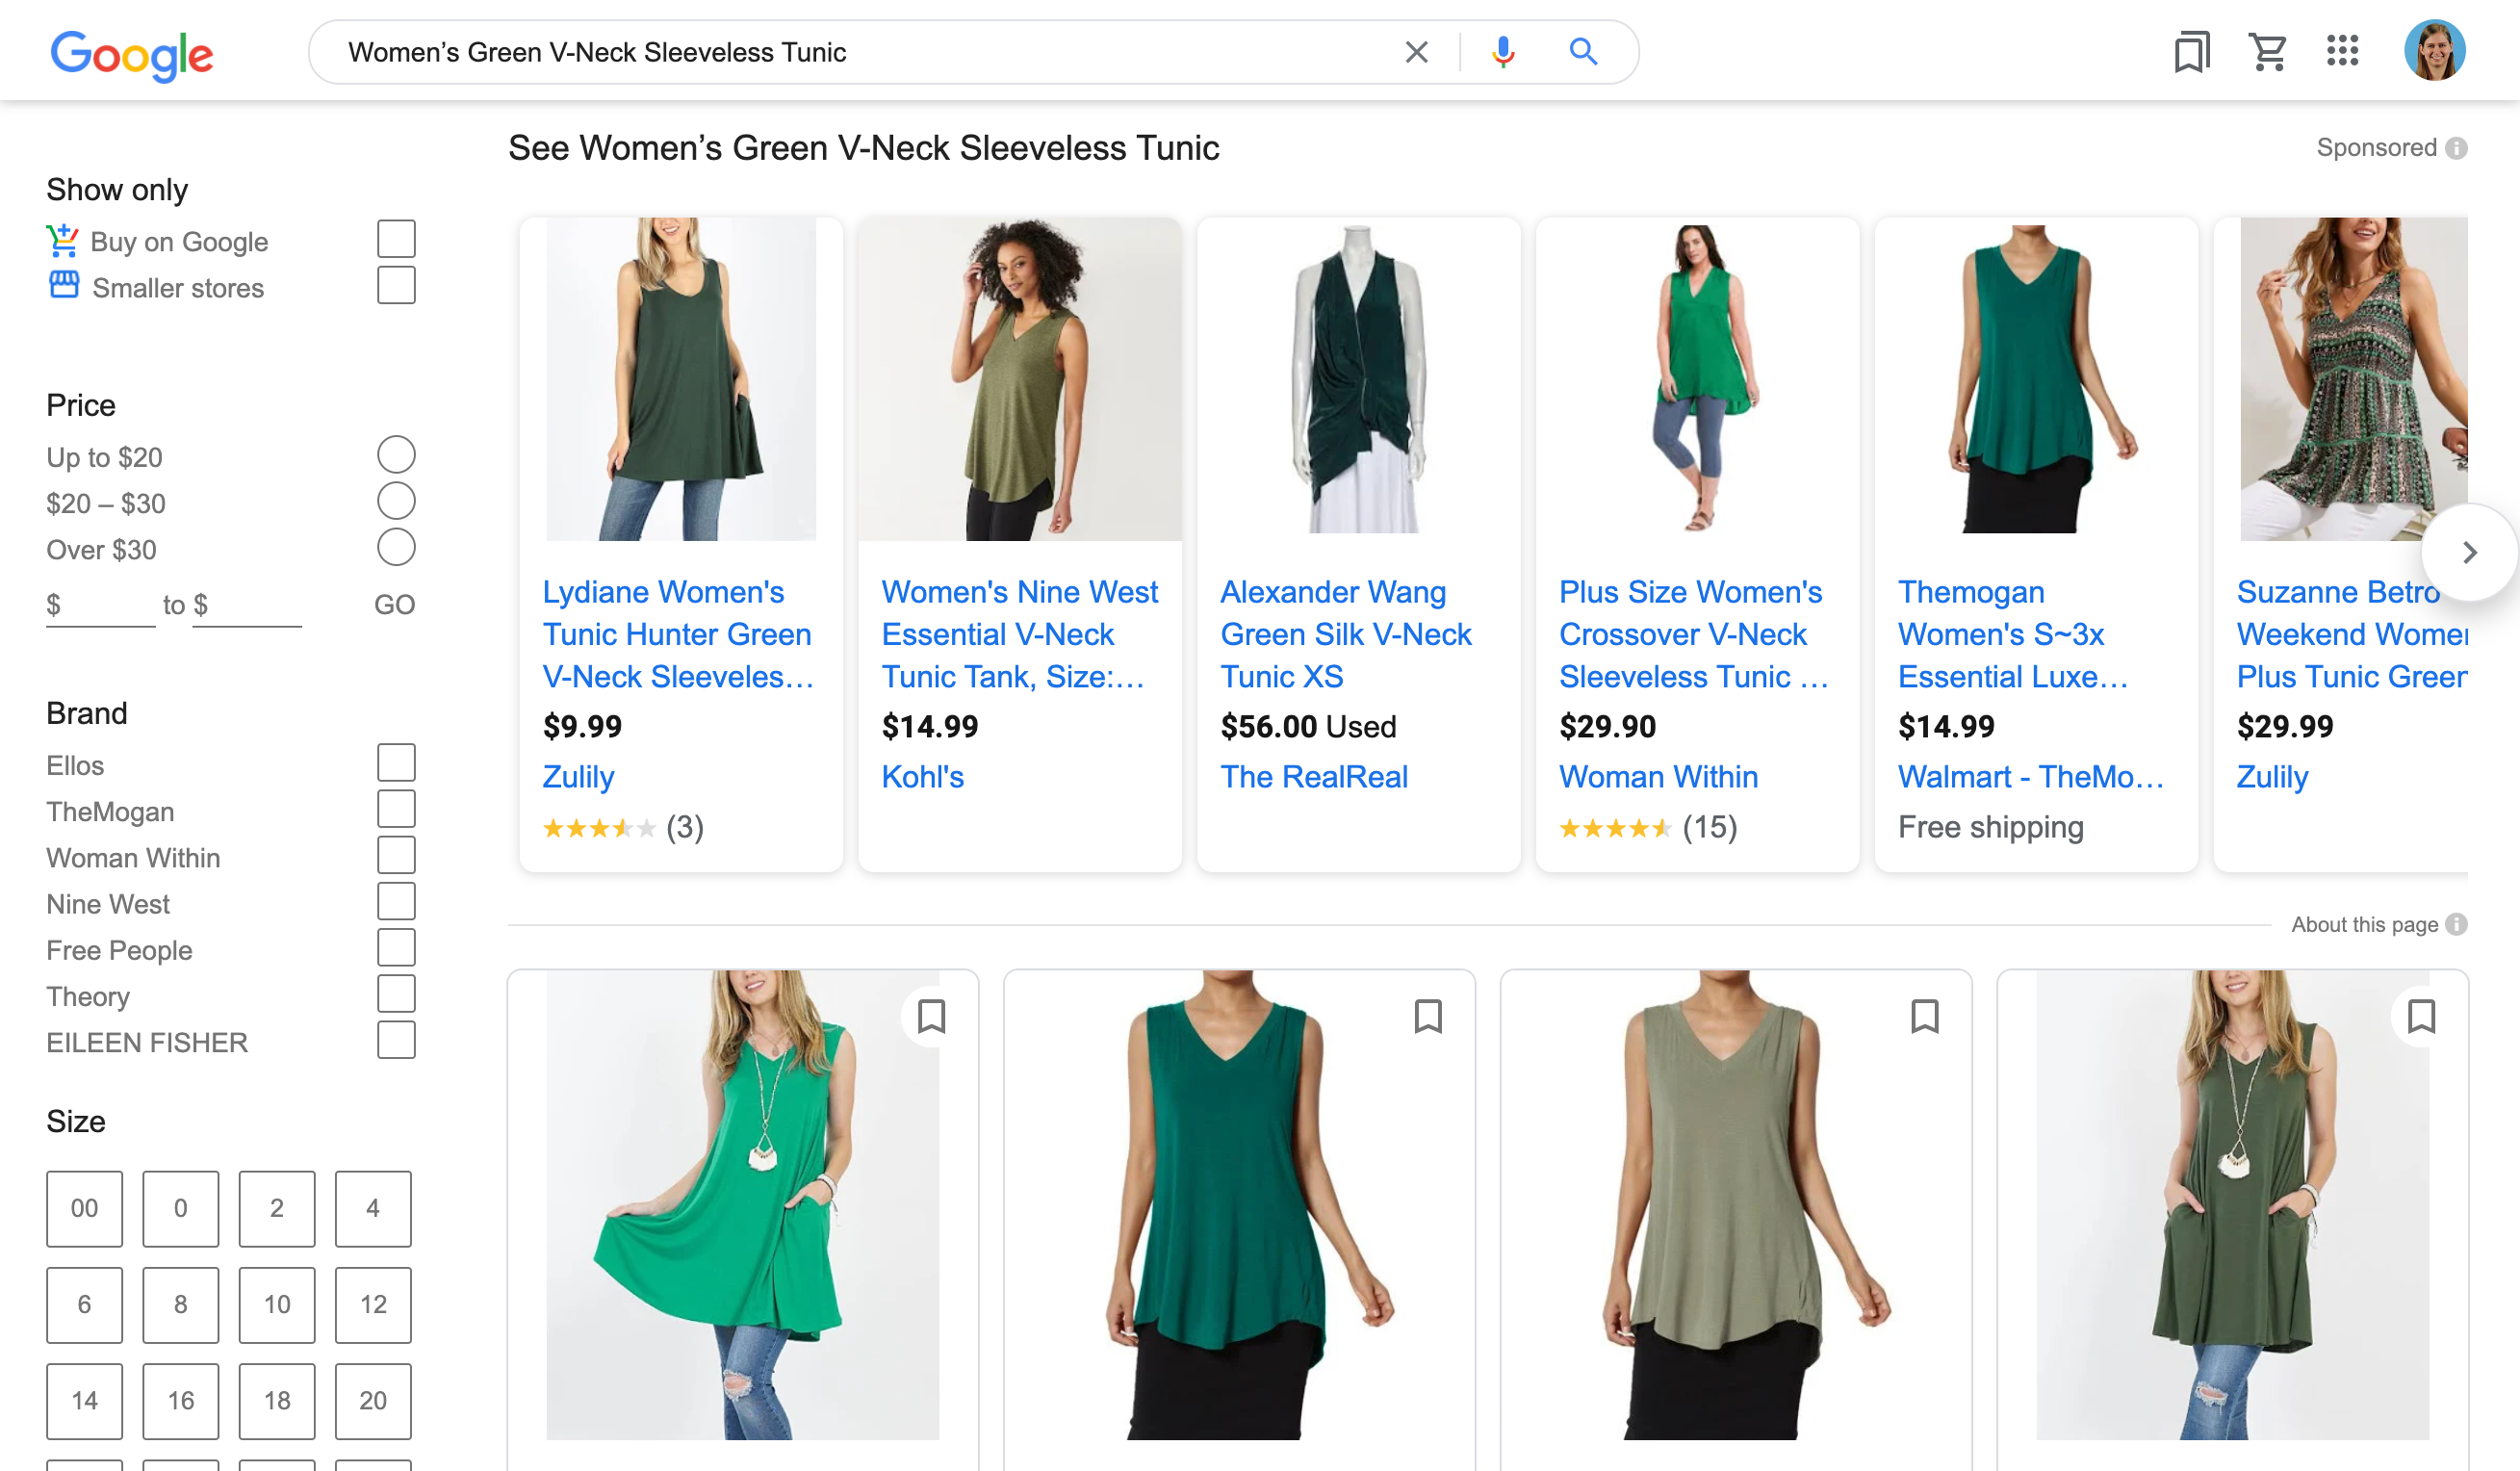 How To Accurately Measure Clothes For Selling Online - My Growing Creative  Life